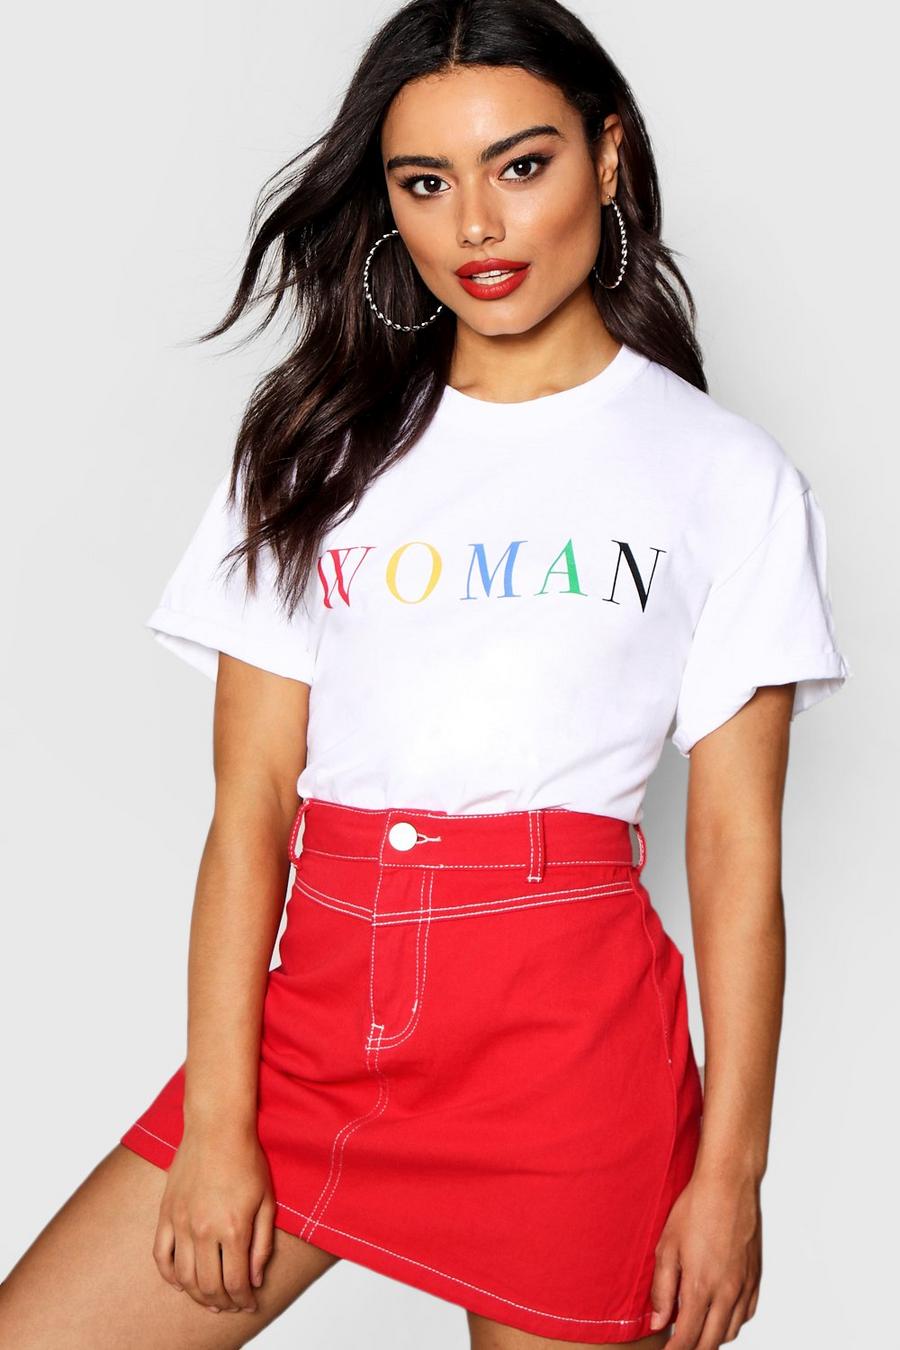 T-shirt Woman con slogan in colori arcobaleno, White image number 1